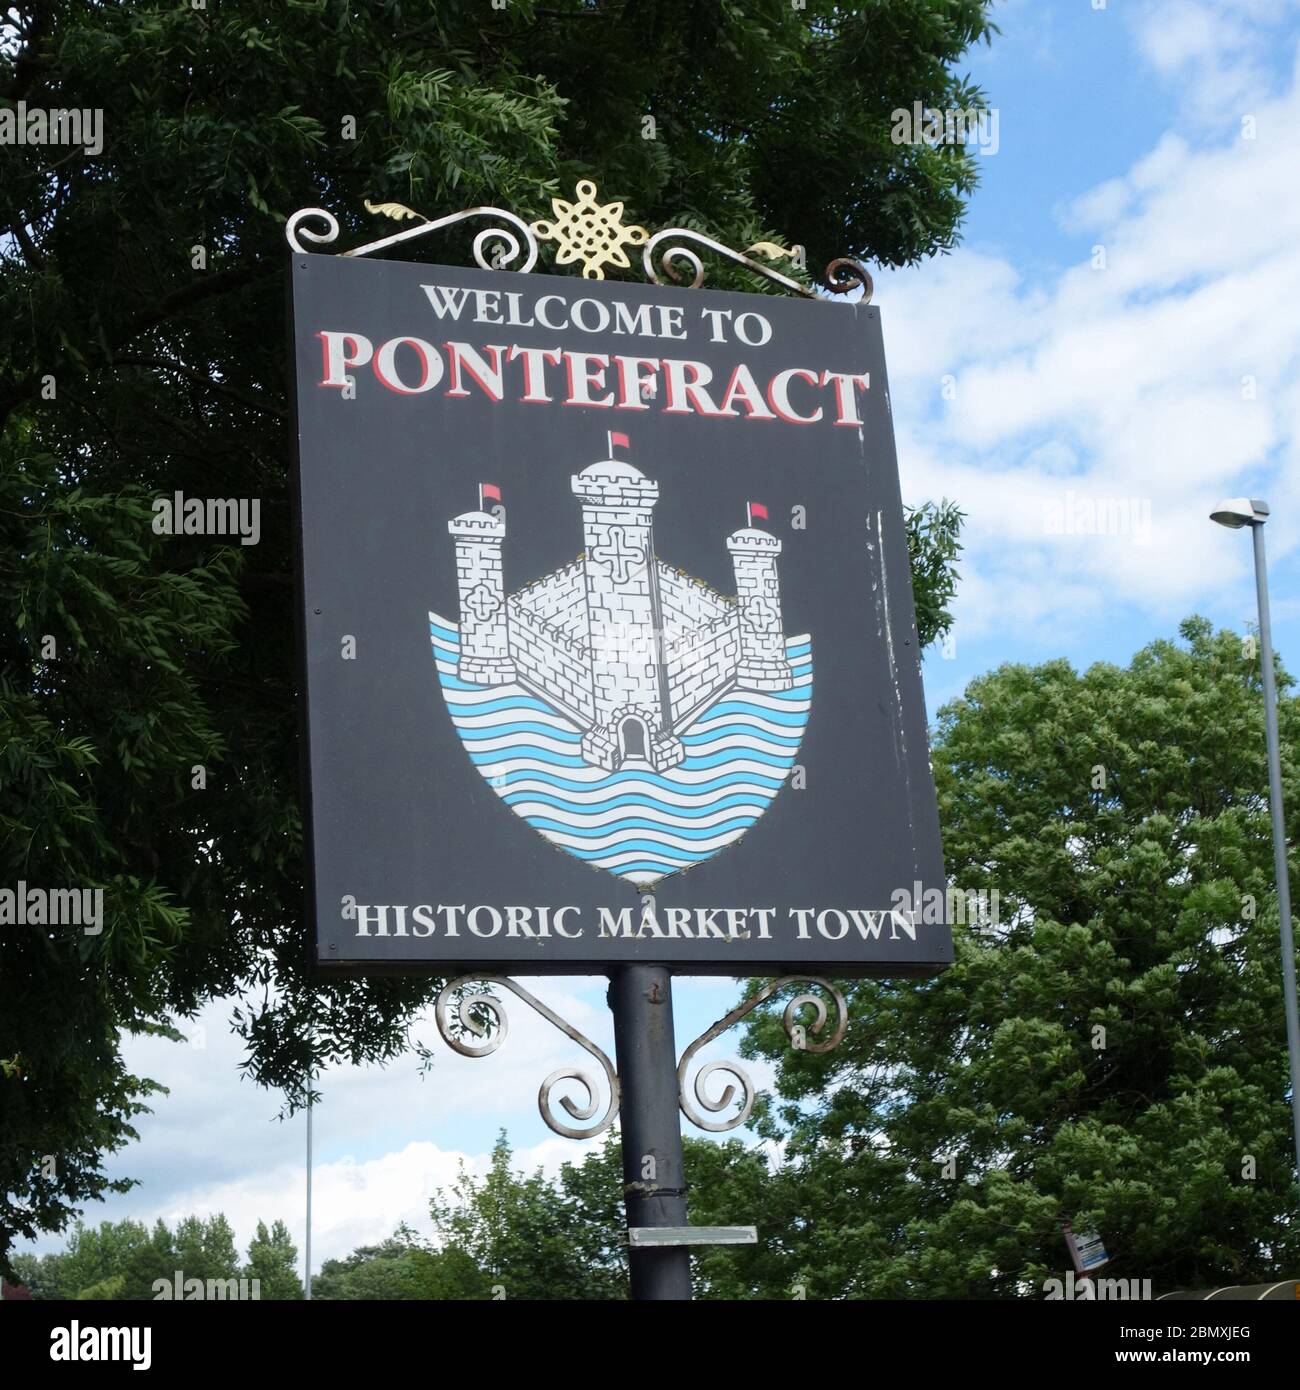 The Welcome To Pontefract sign which greats visitors arriving in Pontefract via Wakefield Road. Stock Photo